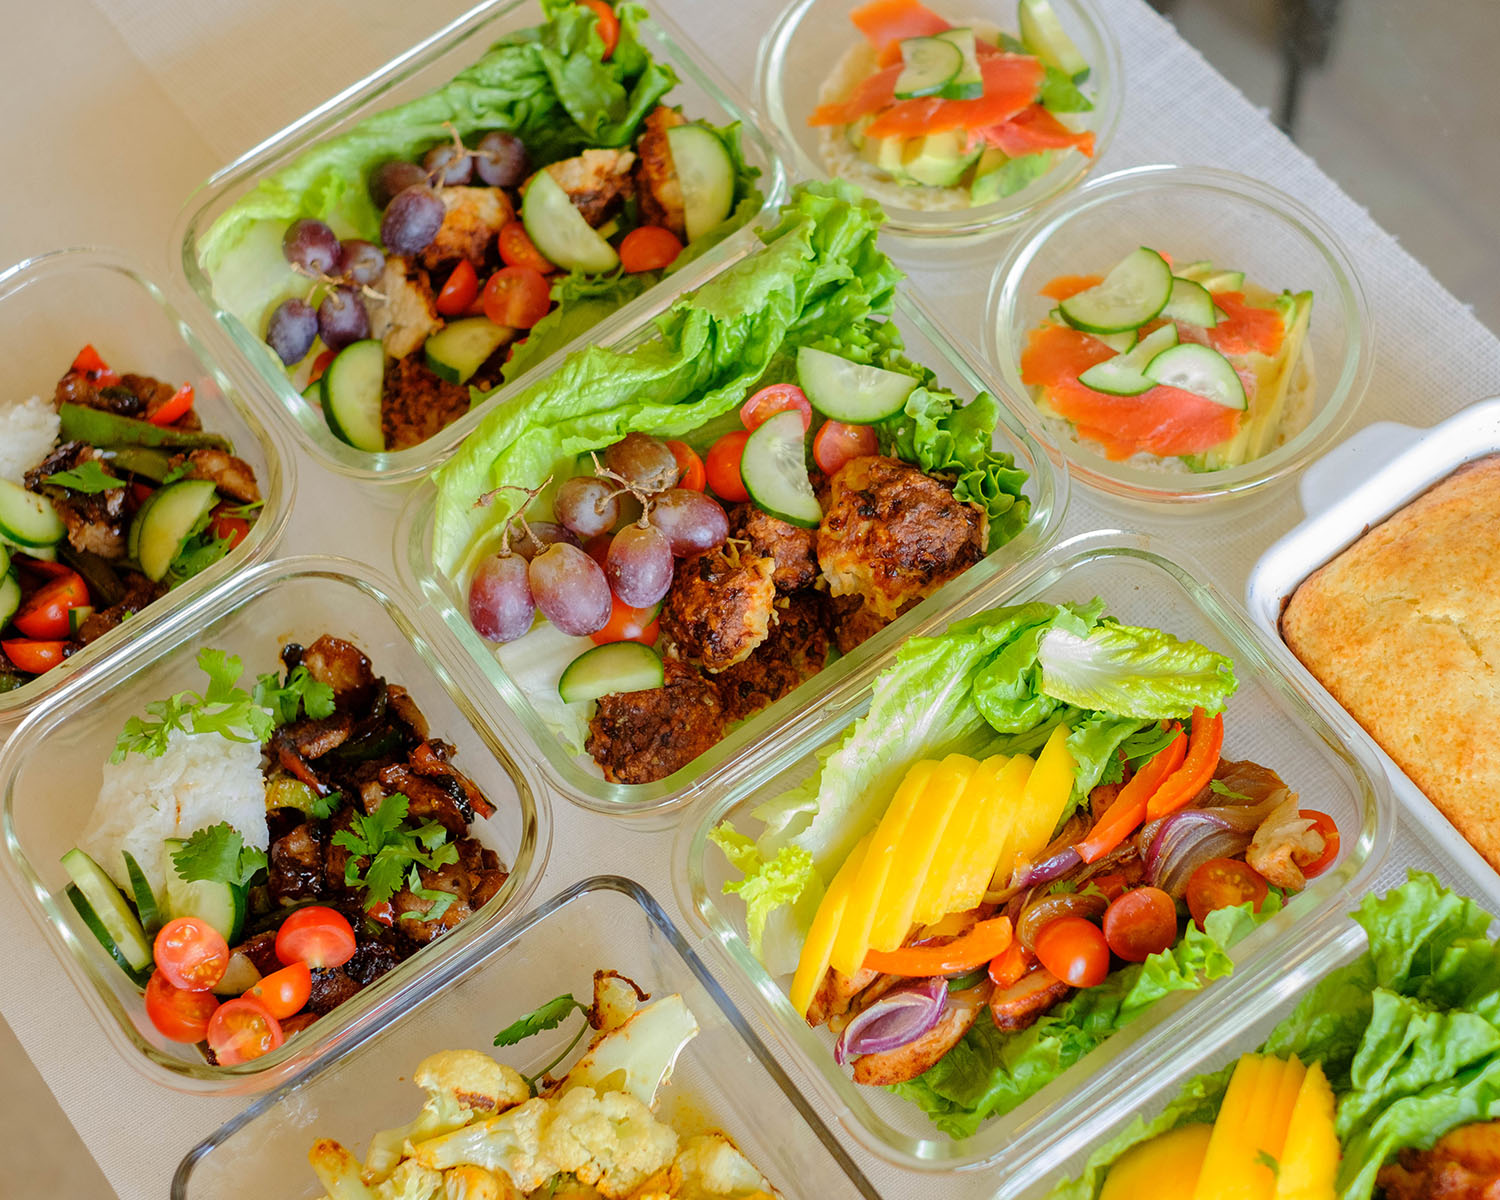 The Best Meal Prep Containers for Meal Prepping on the Go